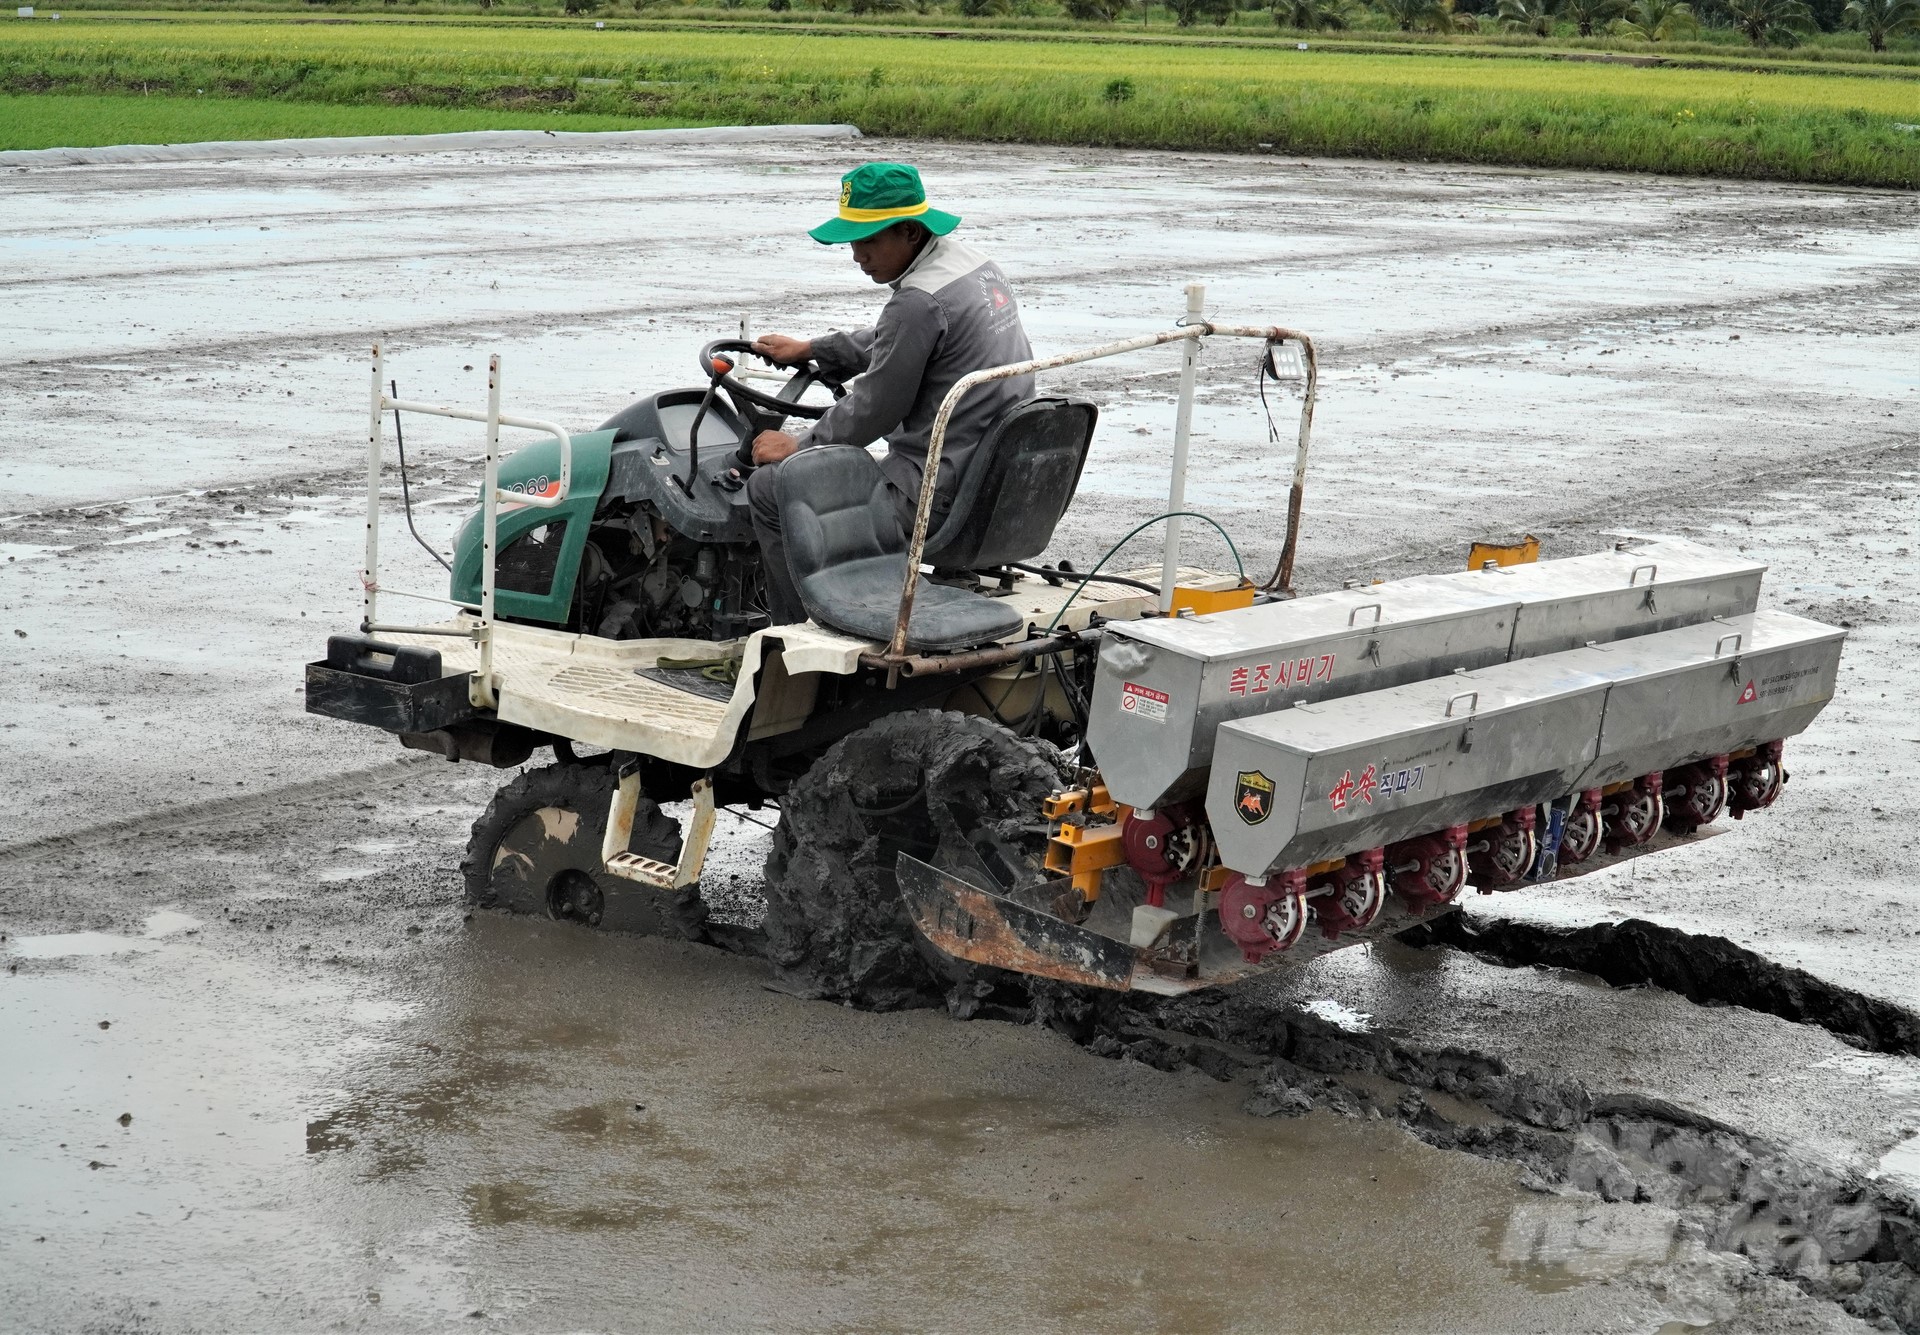 In the 2023 autumn-winter rice crop, Mekong Delta farmers promote mechanization of the sowing stage and use cluster sowing machines in combination with burying fertilizers, both reducing the amount of rice seed and increasing the efficiency of fertilizer use, saving labor. Photo: Kim Anh.